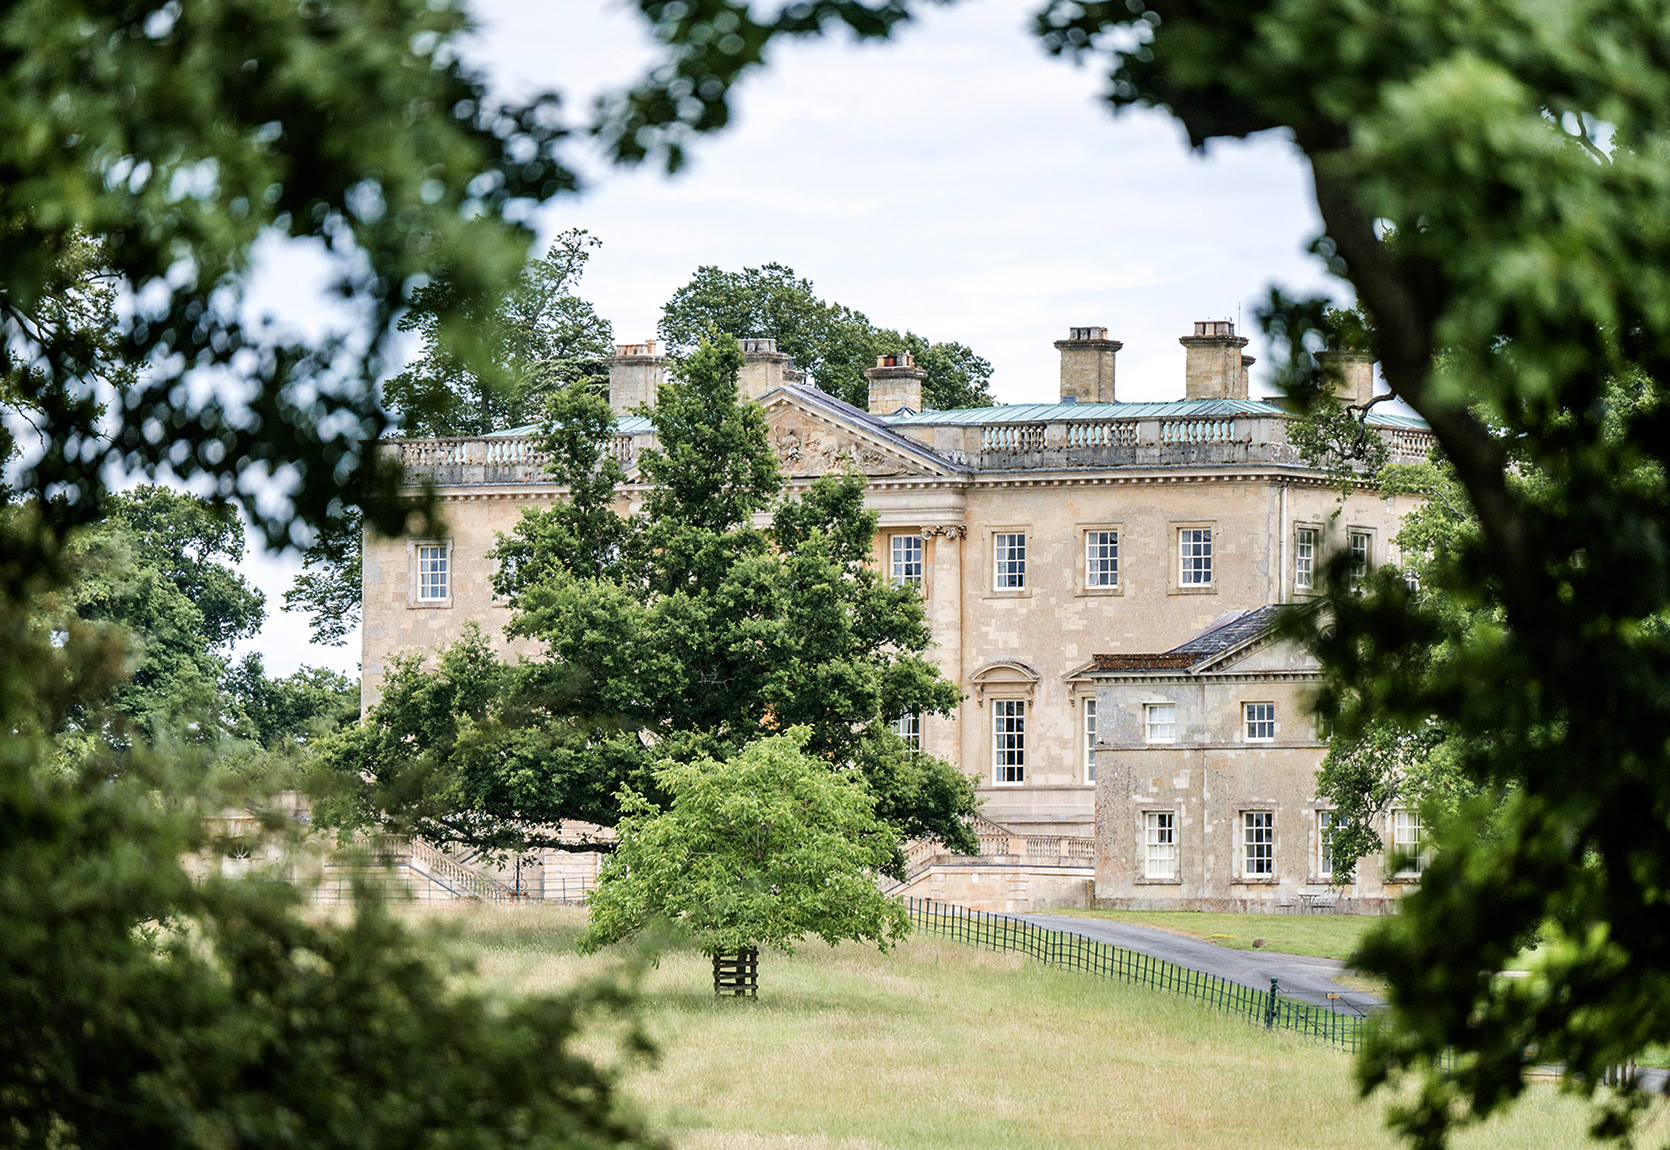 A view through the trees with Kirtlington Park in the background